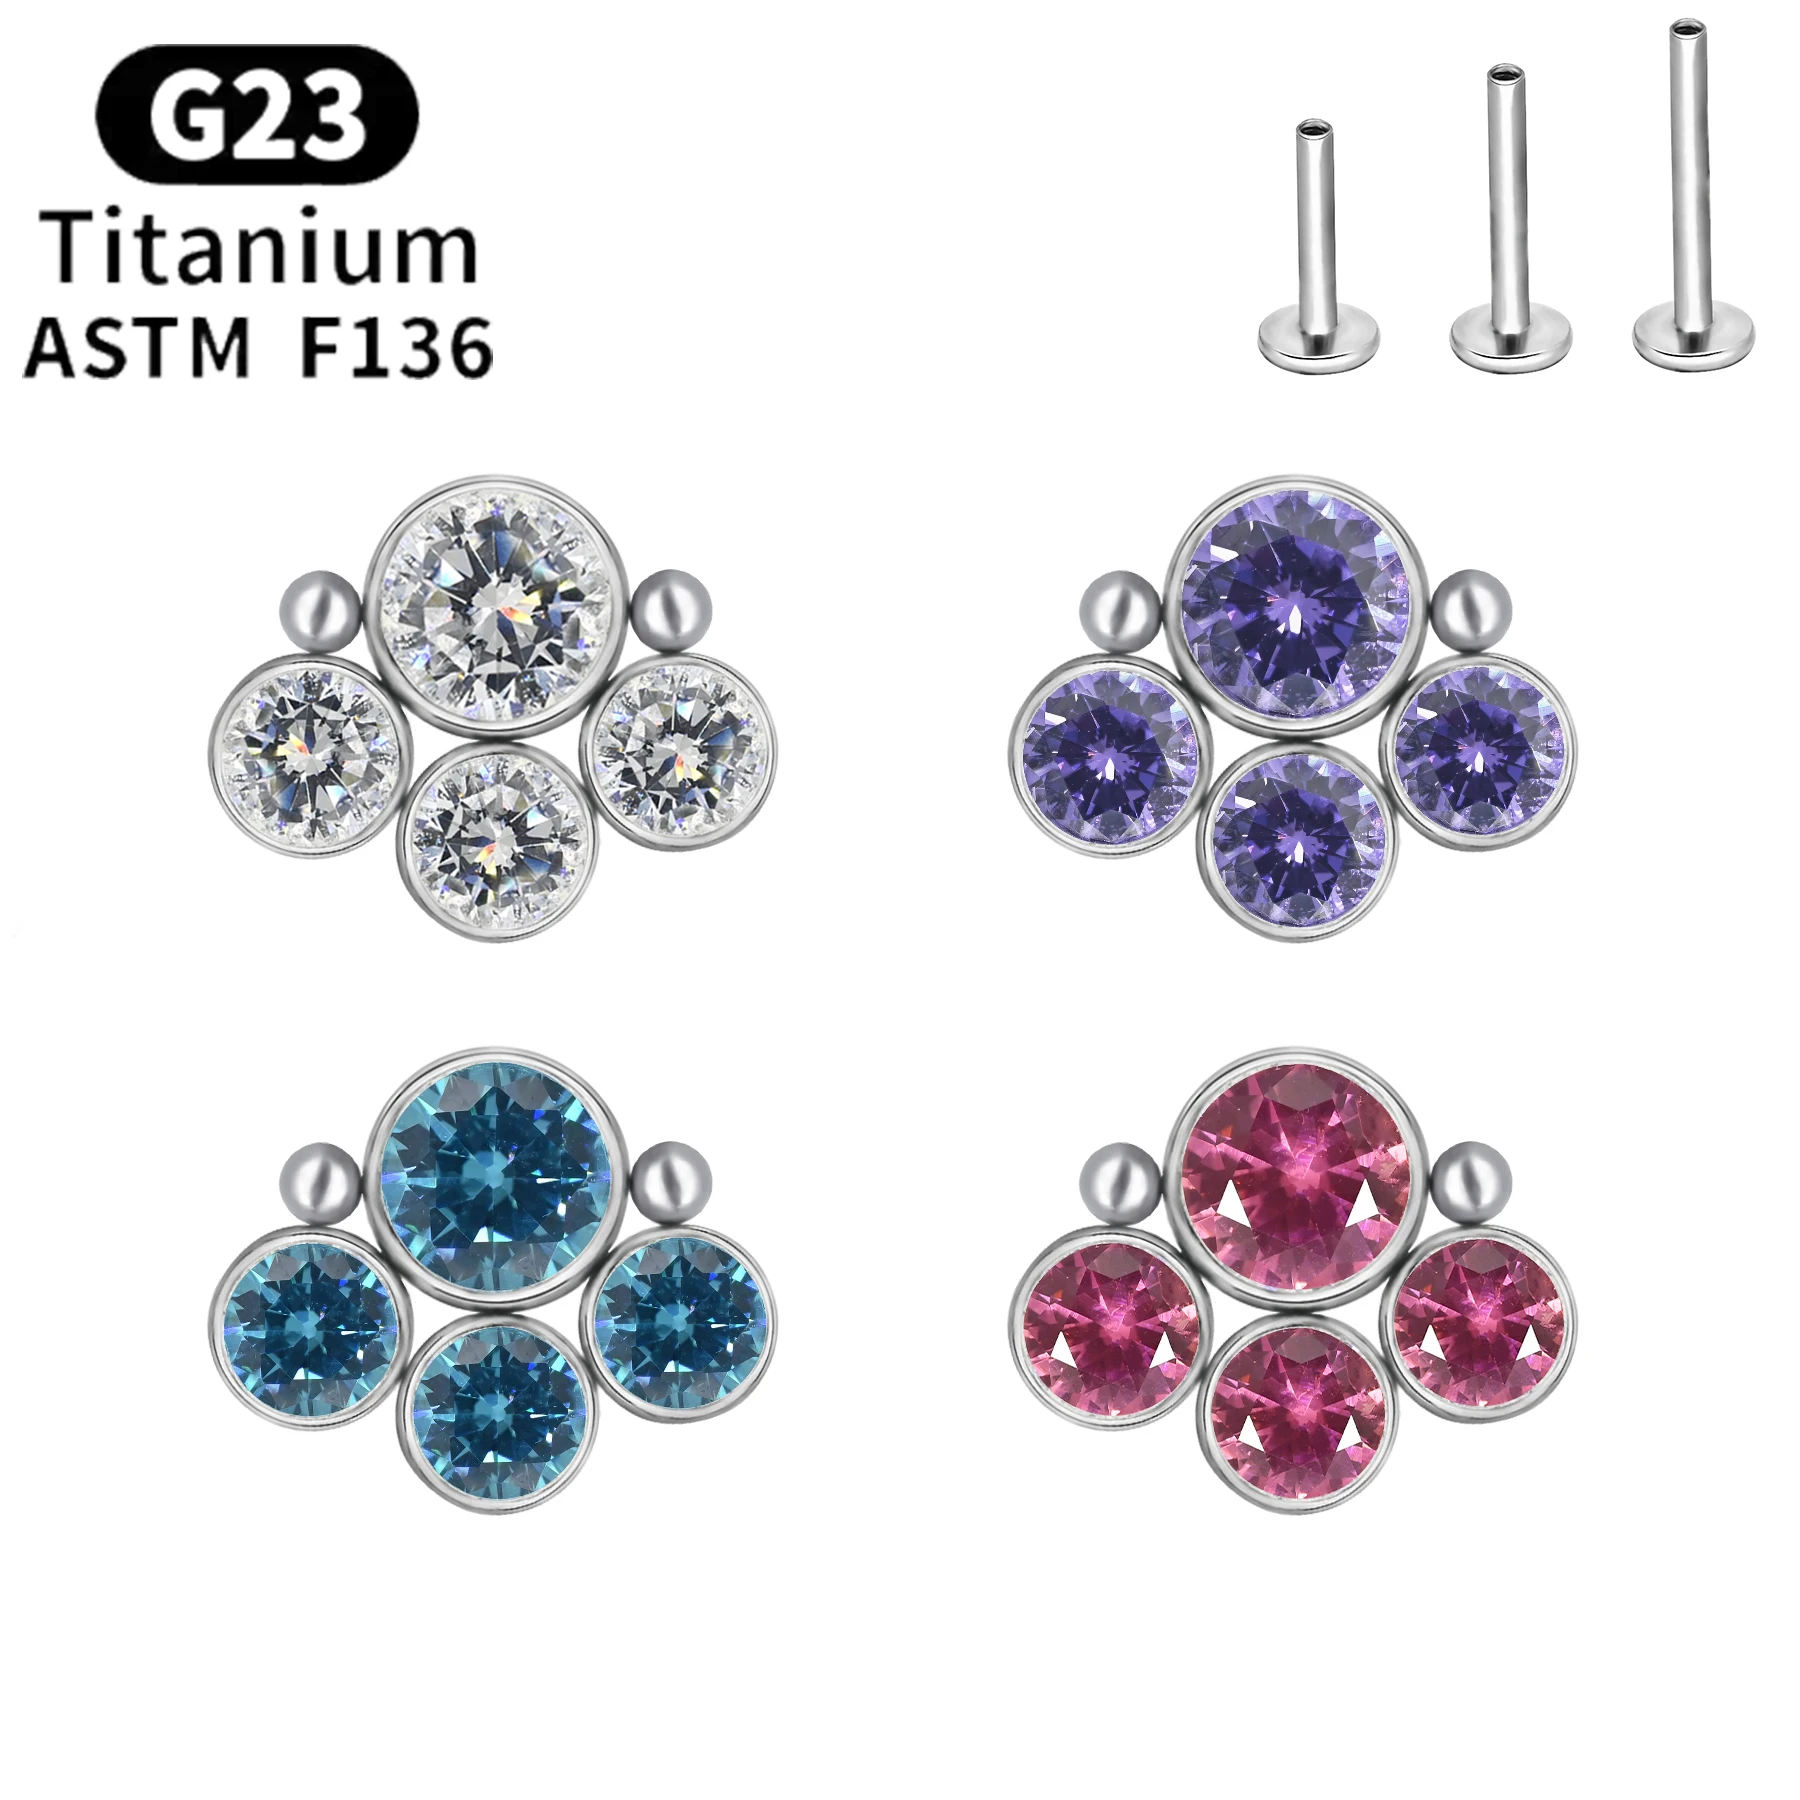 

G23 Women's Inlaid Crystal Stud Earrings Perforated Tragus Cartilage Spiral Ball Ear Nose Stud Lip/Rod